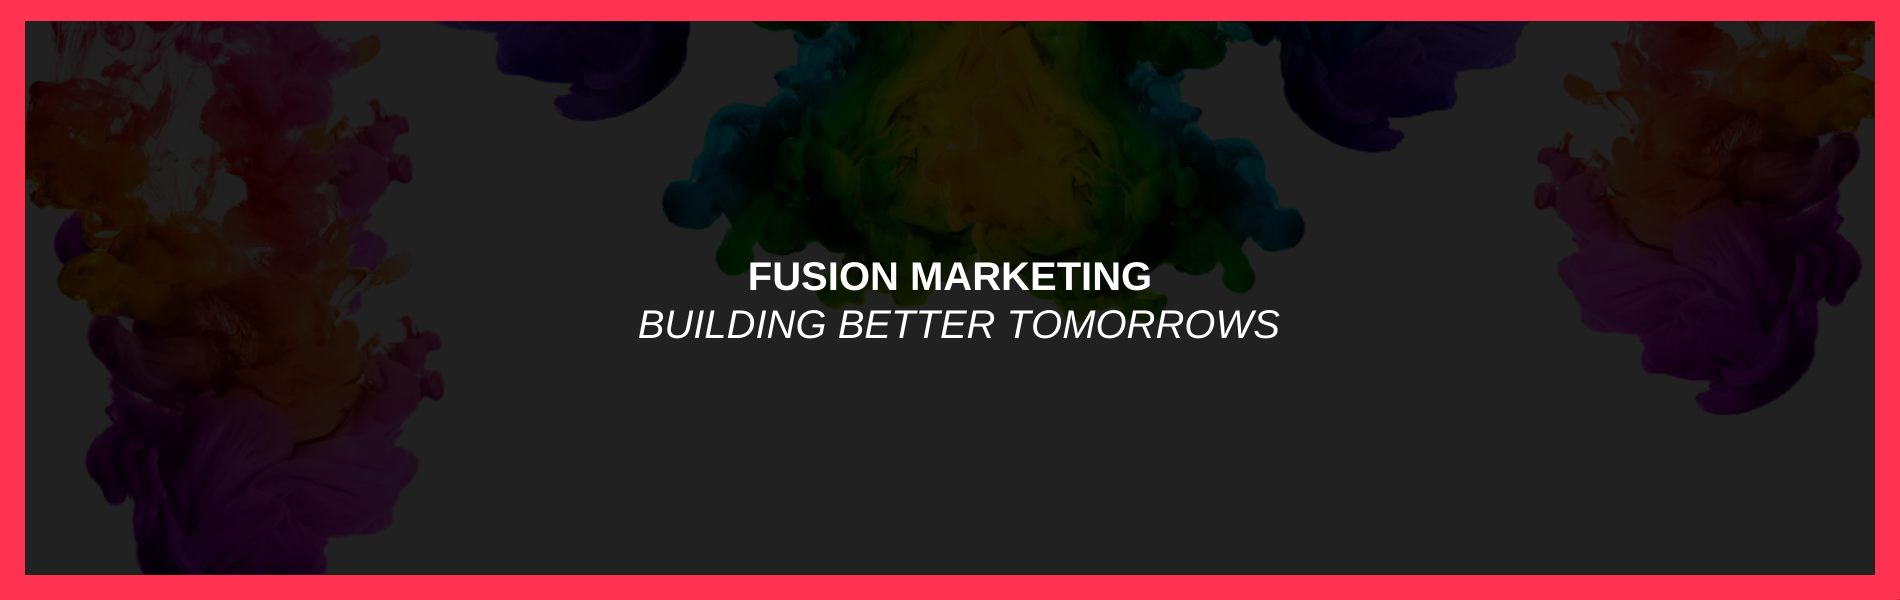 Fusion Marketing: Building Better Tomorrows